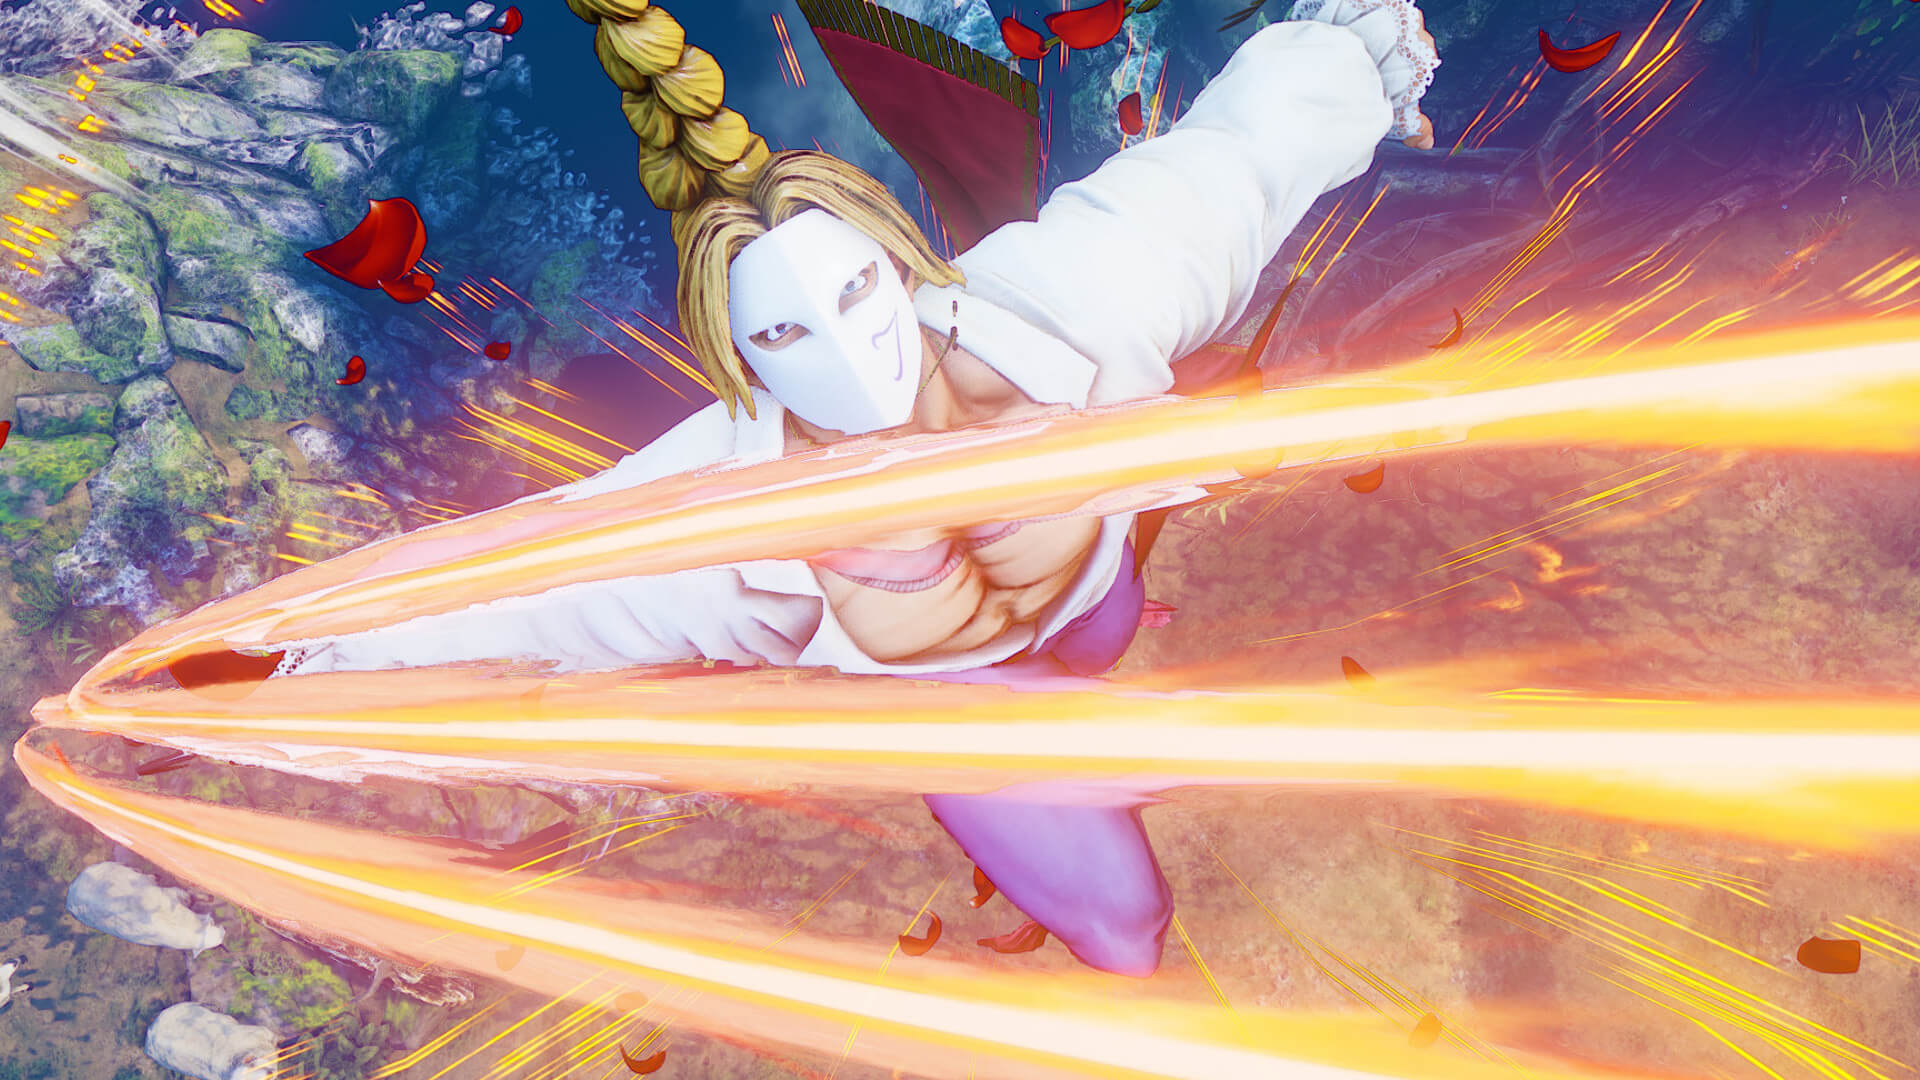 Vega using his claws to attack in Street Fighter 5